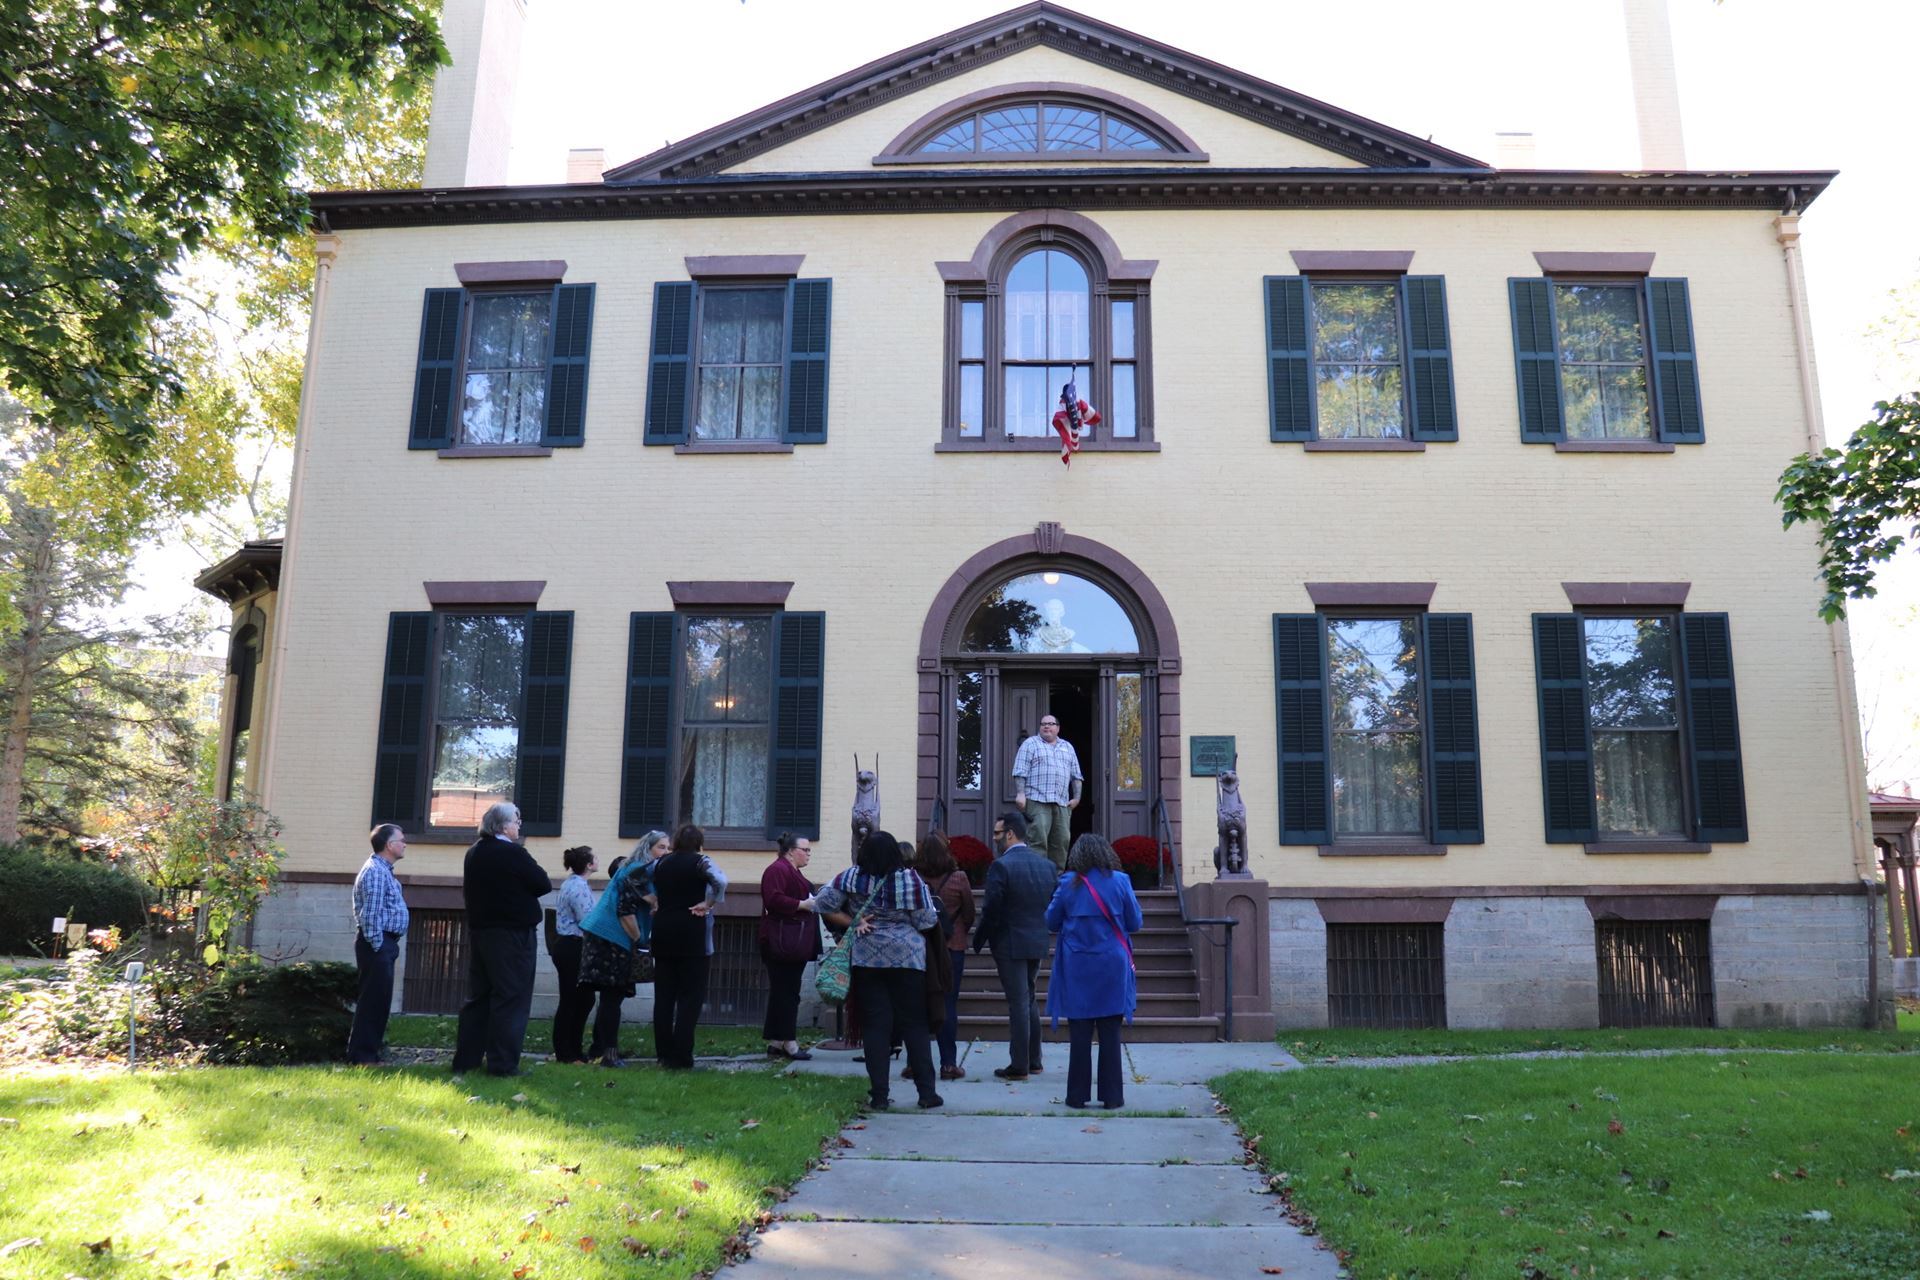 Thank you to the Harriet Tubman House, the @sewardhousemuseum, and the @equalrightsheritage for hosting our Central NY Meet-Up! We’re halfway through our Fall 2019 Workshop and Meet-Up tour around New York State. Learn where MANY will be next and we will see you on the road! 